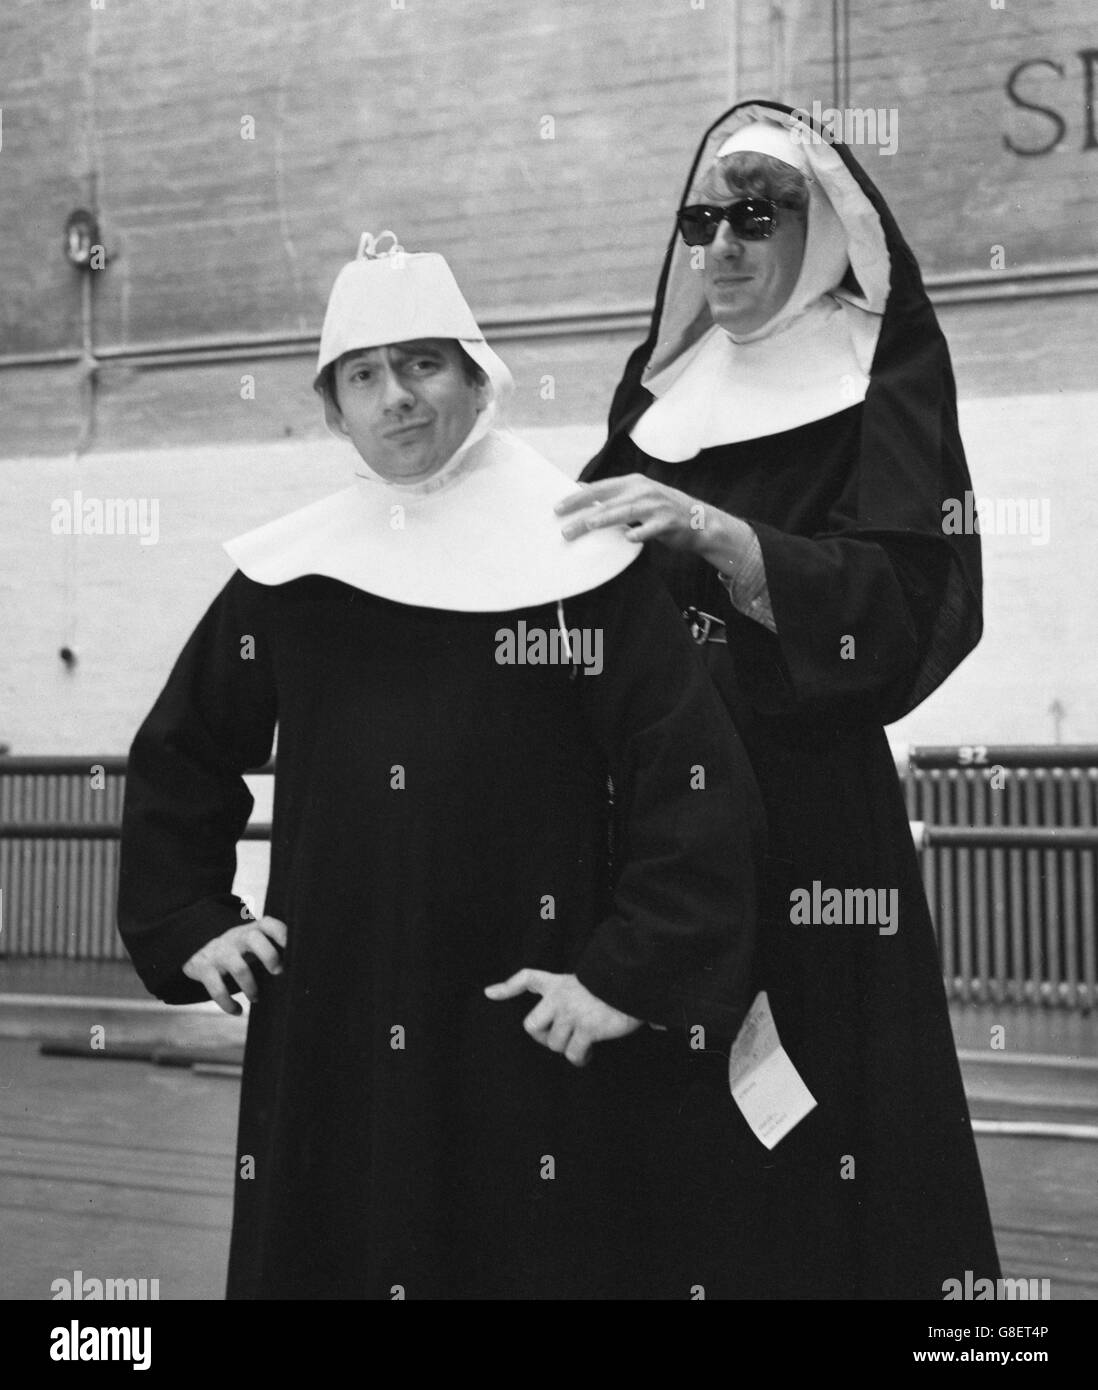 Dudley Moore (left) and Peter Cook rehearse their 'Leaping Nuns' sketch for Cook's revue Rustle of Spring at the Phoenix Theatre, London. The revue opens there on Friday to raise money for the magazine Private Eye to help defray costs of the libel action against it by Lord Russell of Liverpool. Stock Photo